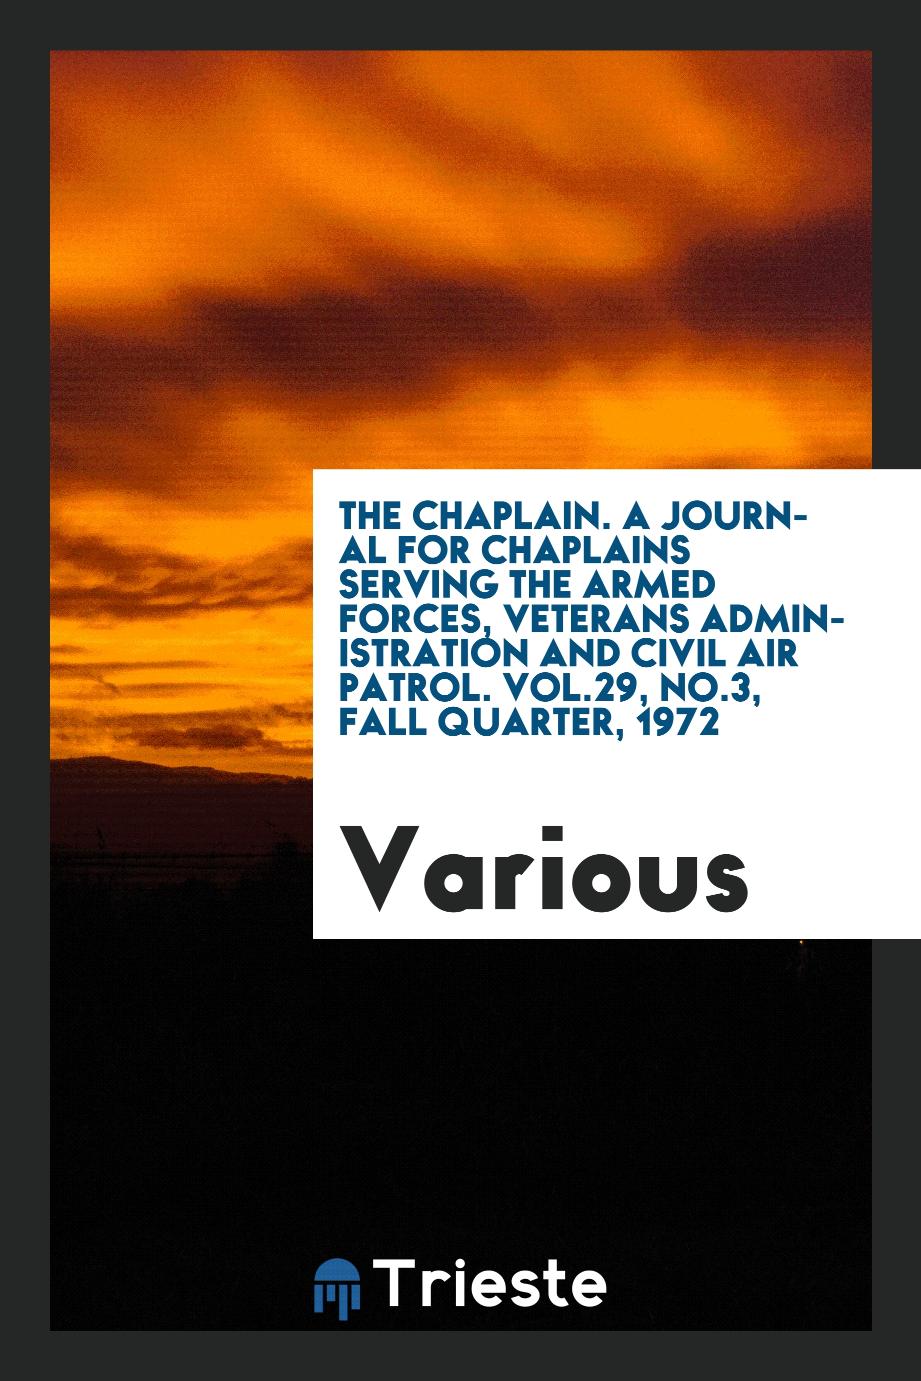 The Chaplain. A journal for chaplains serving the armed forces, veterans administration and civil air patrol. Vol.29, No.3, fall quarter, 1972